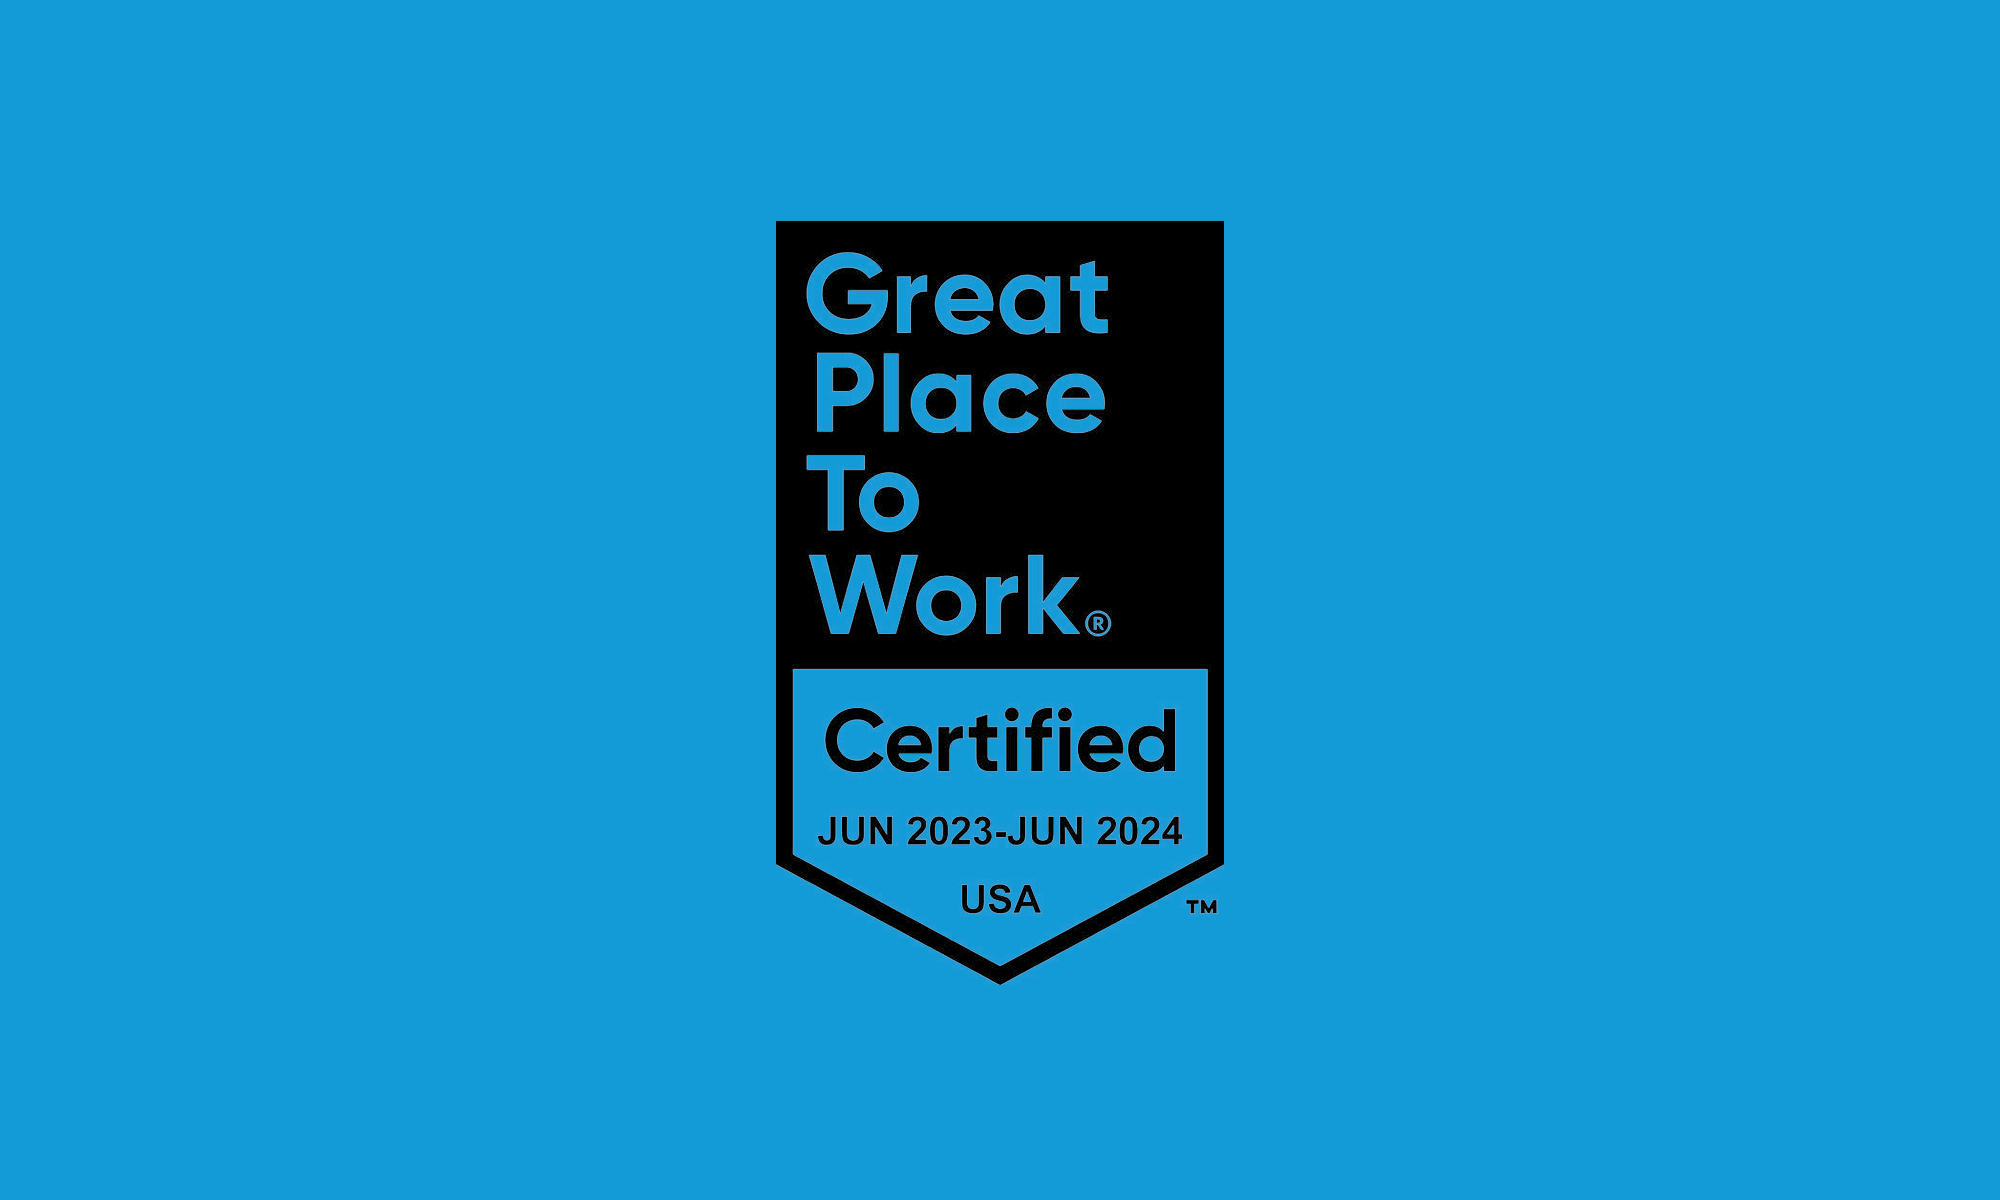 Klick proud to be a Great Place to Work for seventh straight year